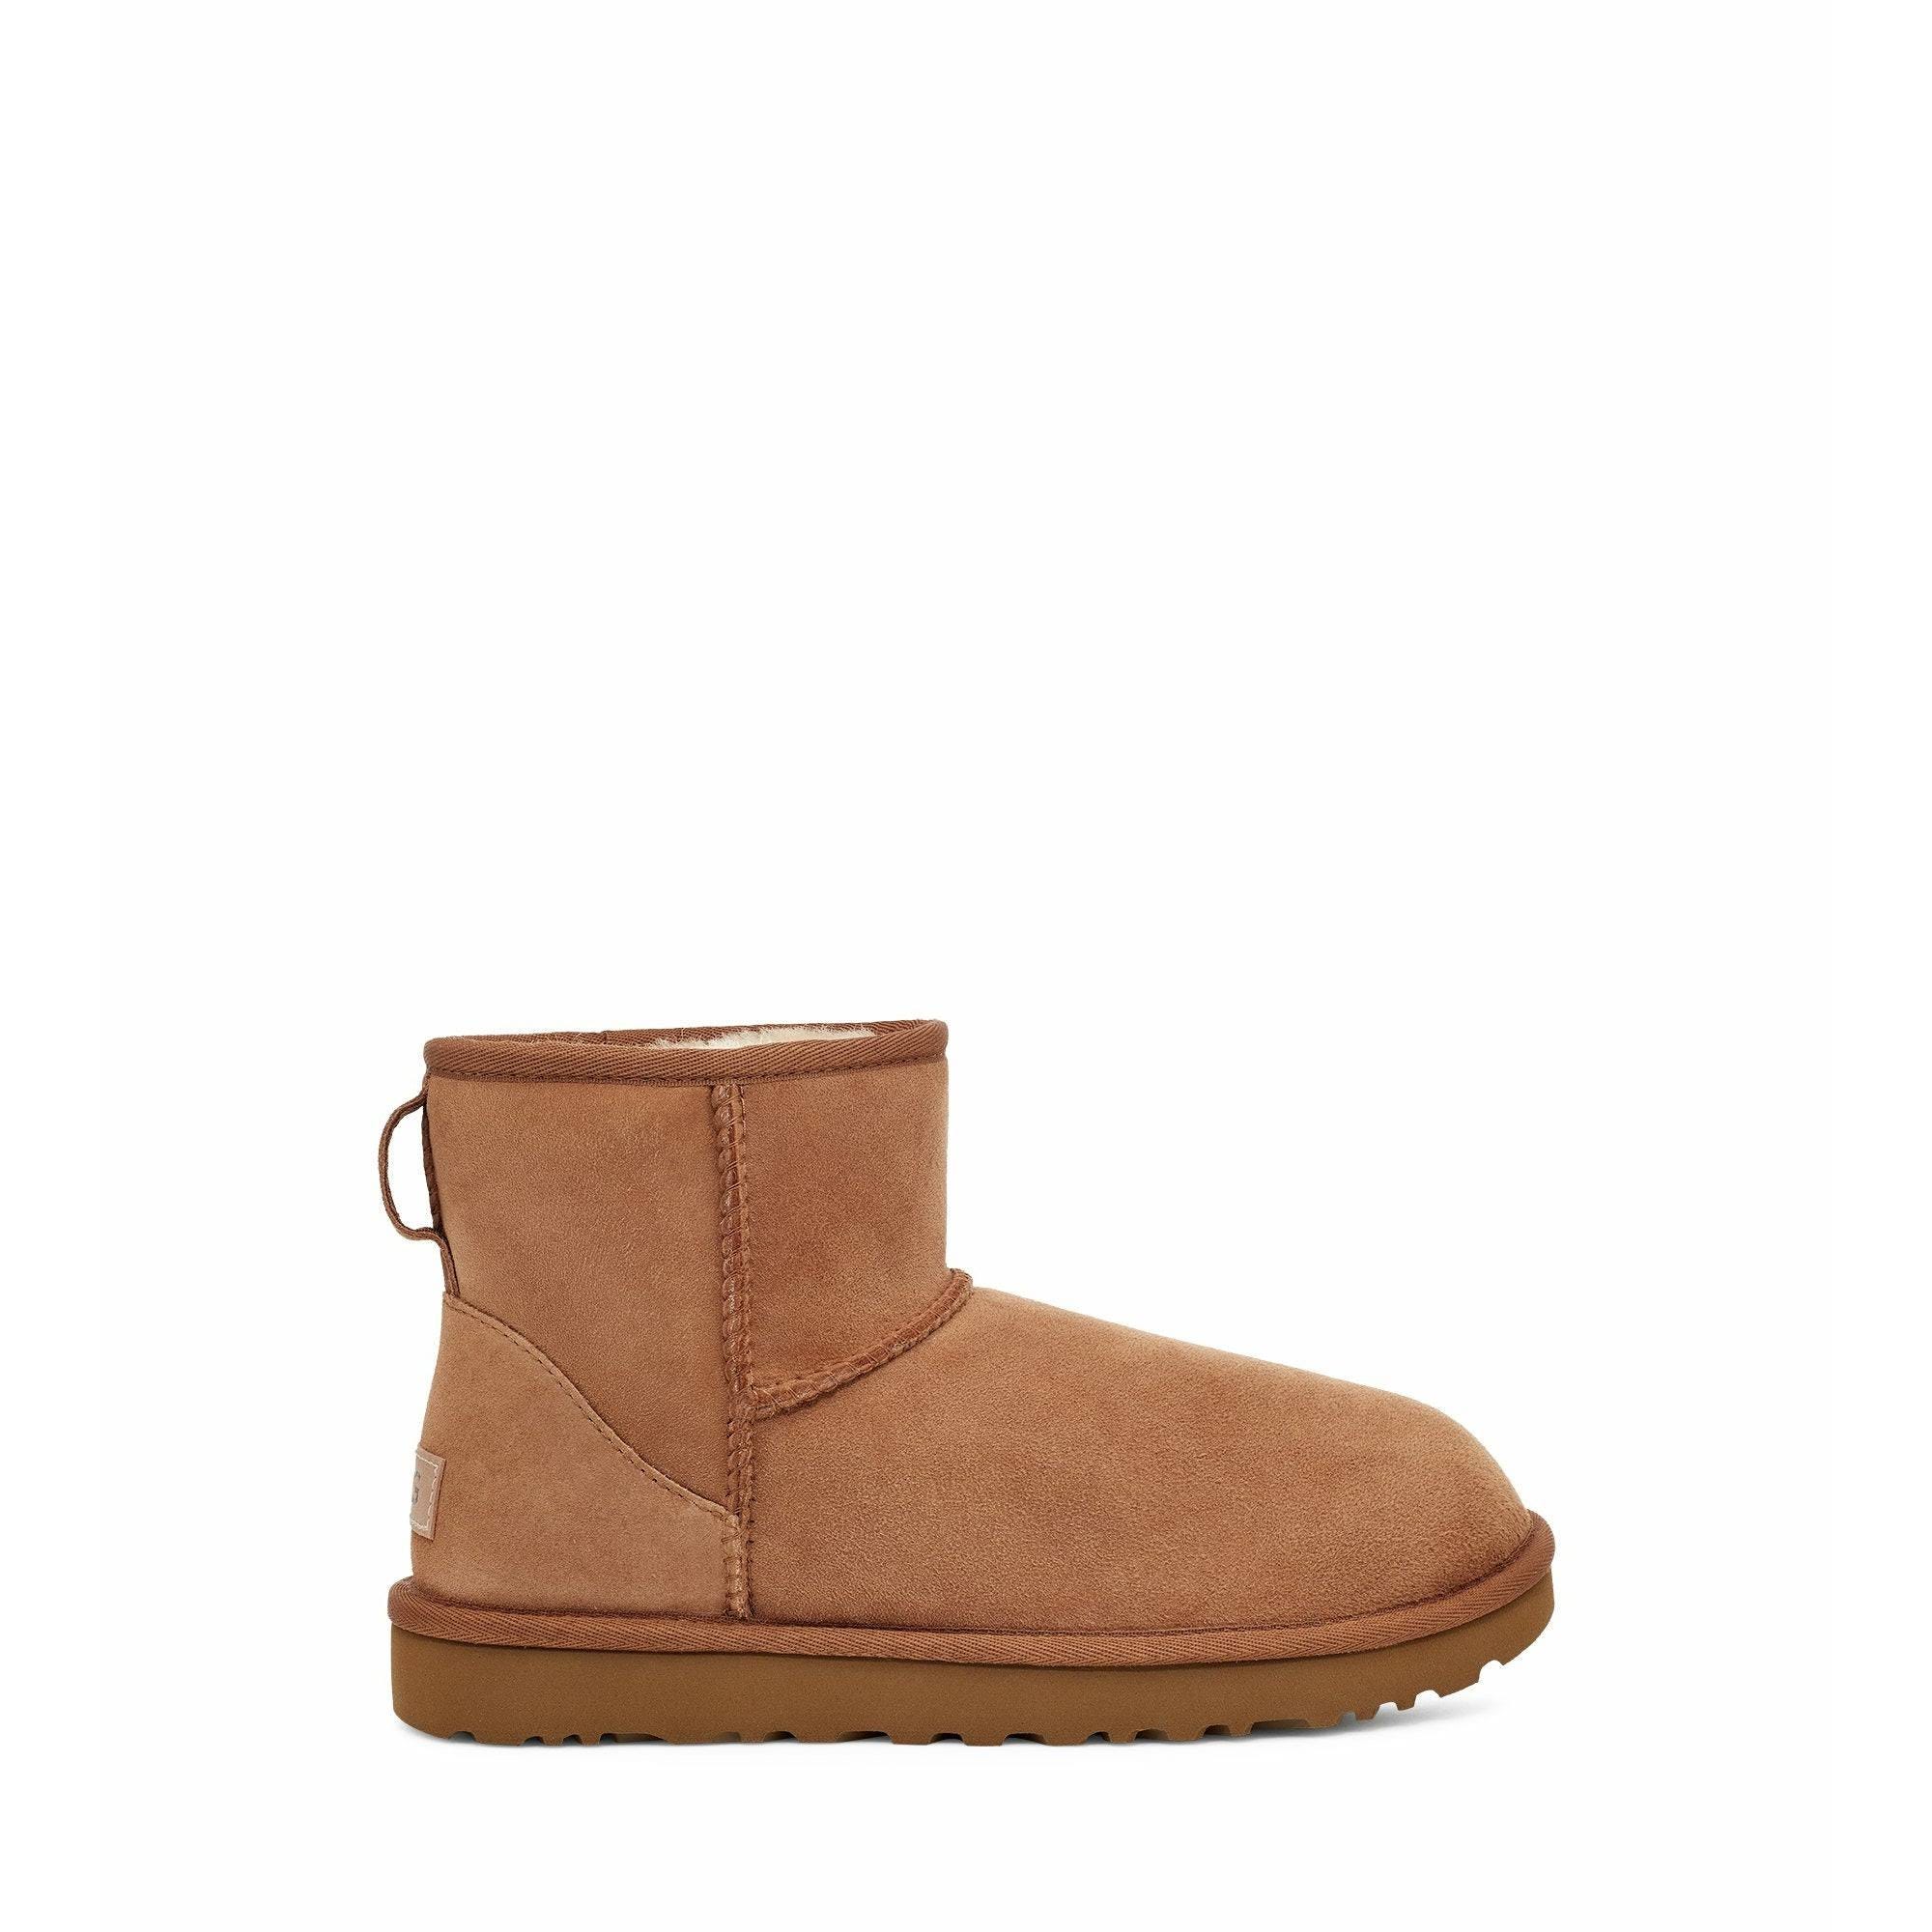 Cozy Ugg Tan Suede Boots for Women - Size 11 | Image